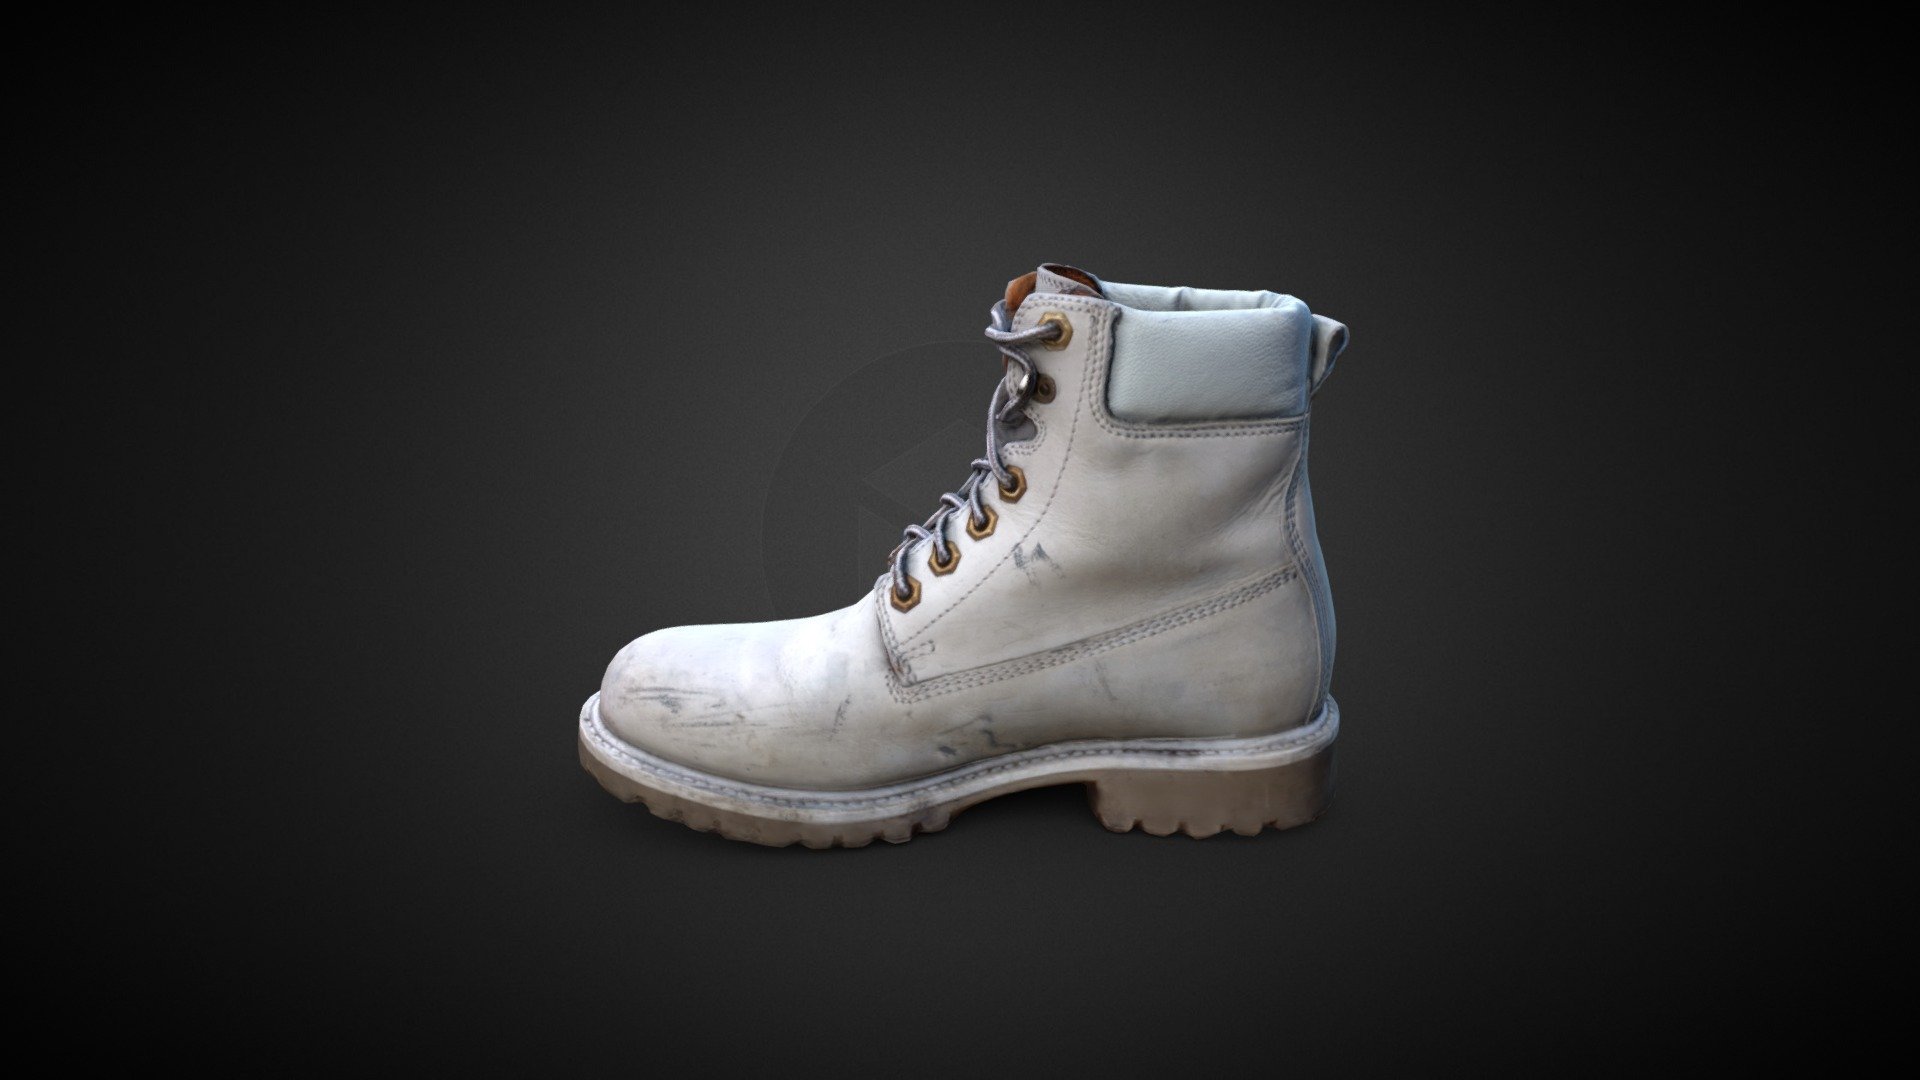 Low Poly 3D Female Leather Boot (Game Ready)

Low Poly 3d model of female leather boots. Two versions available, one with 10k polygons (LowPoly) and the other one with 40k polygons (MediumPoly). The model includes 4k textures (Diffuse, Normals, Occlusion) properly unwrapped.

Also dont forget to check out my other shoes/boots.

If you have any questions I´ll be happy to answer them, just send me a message! - Female White Leather Boots LOW-POLY - 3D model by PolygonalUY 3d model